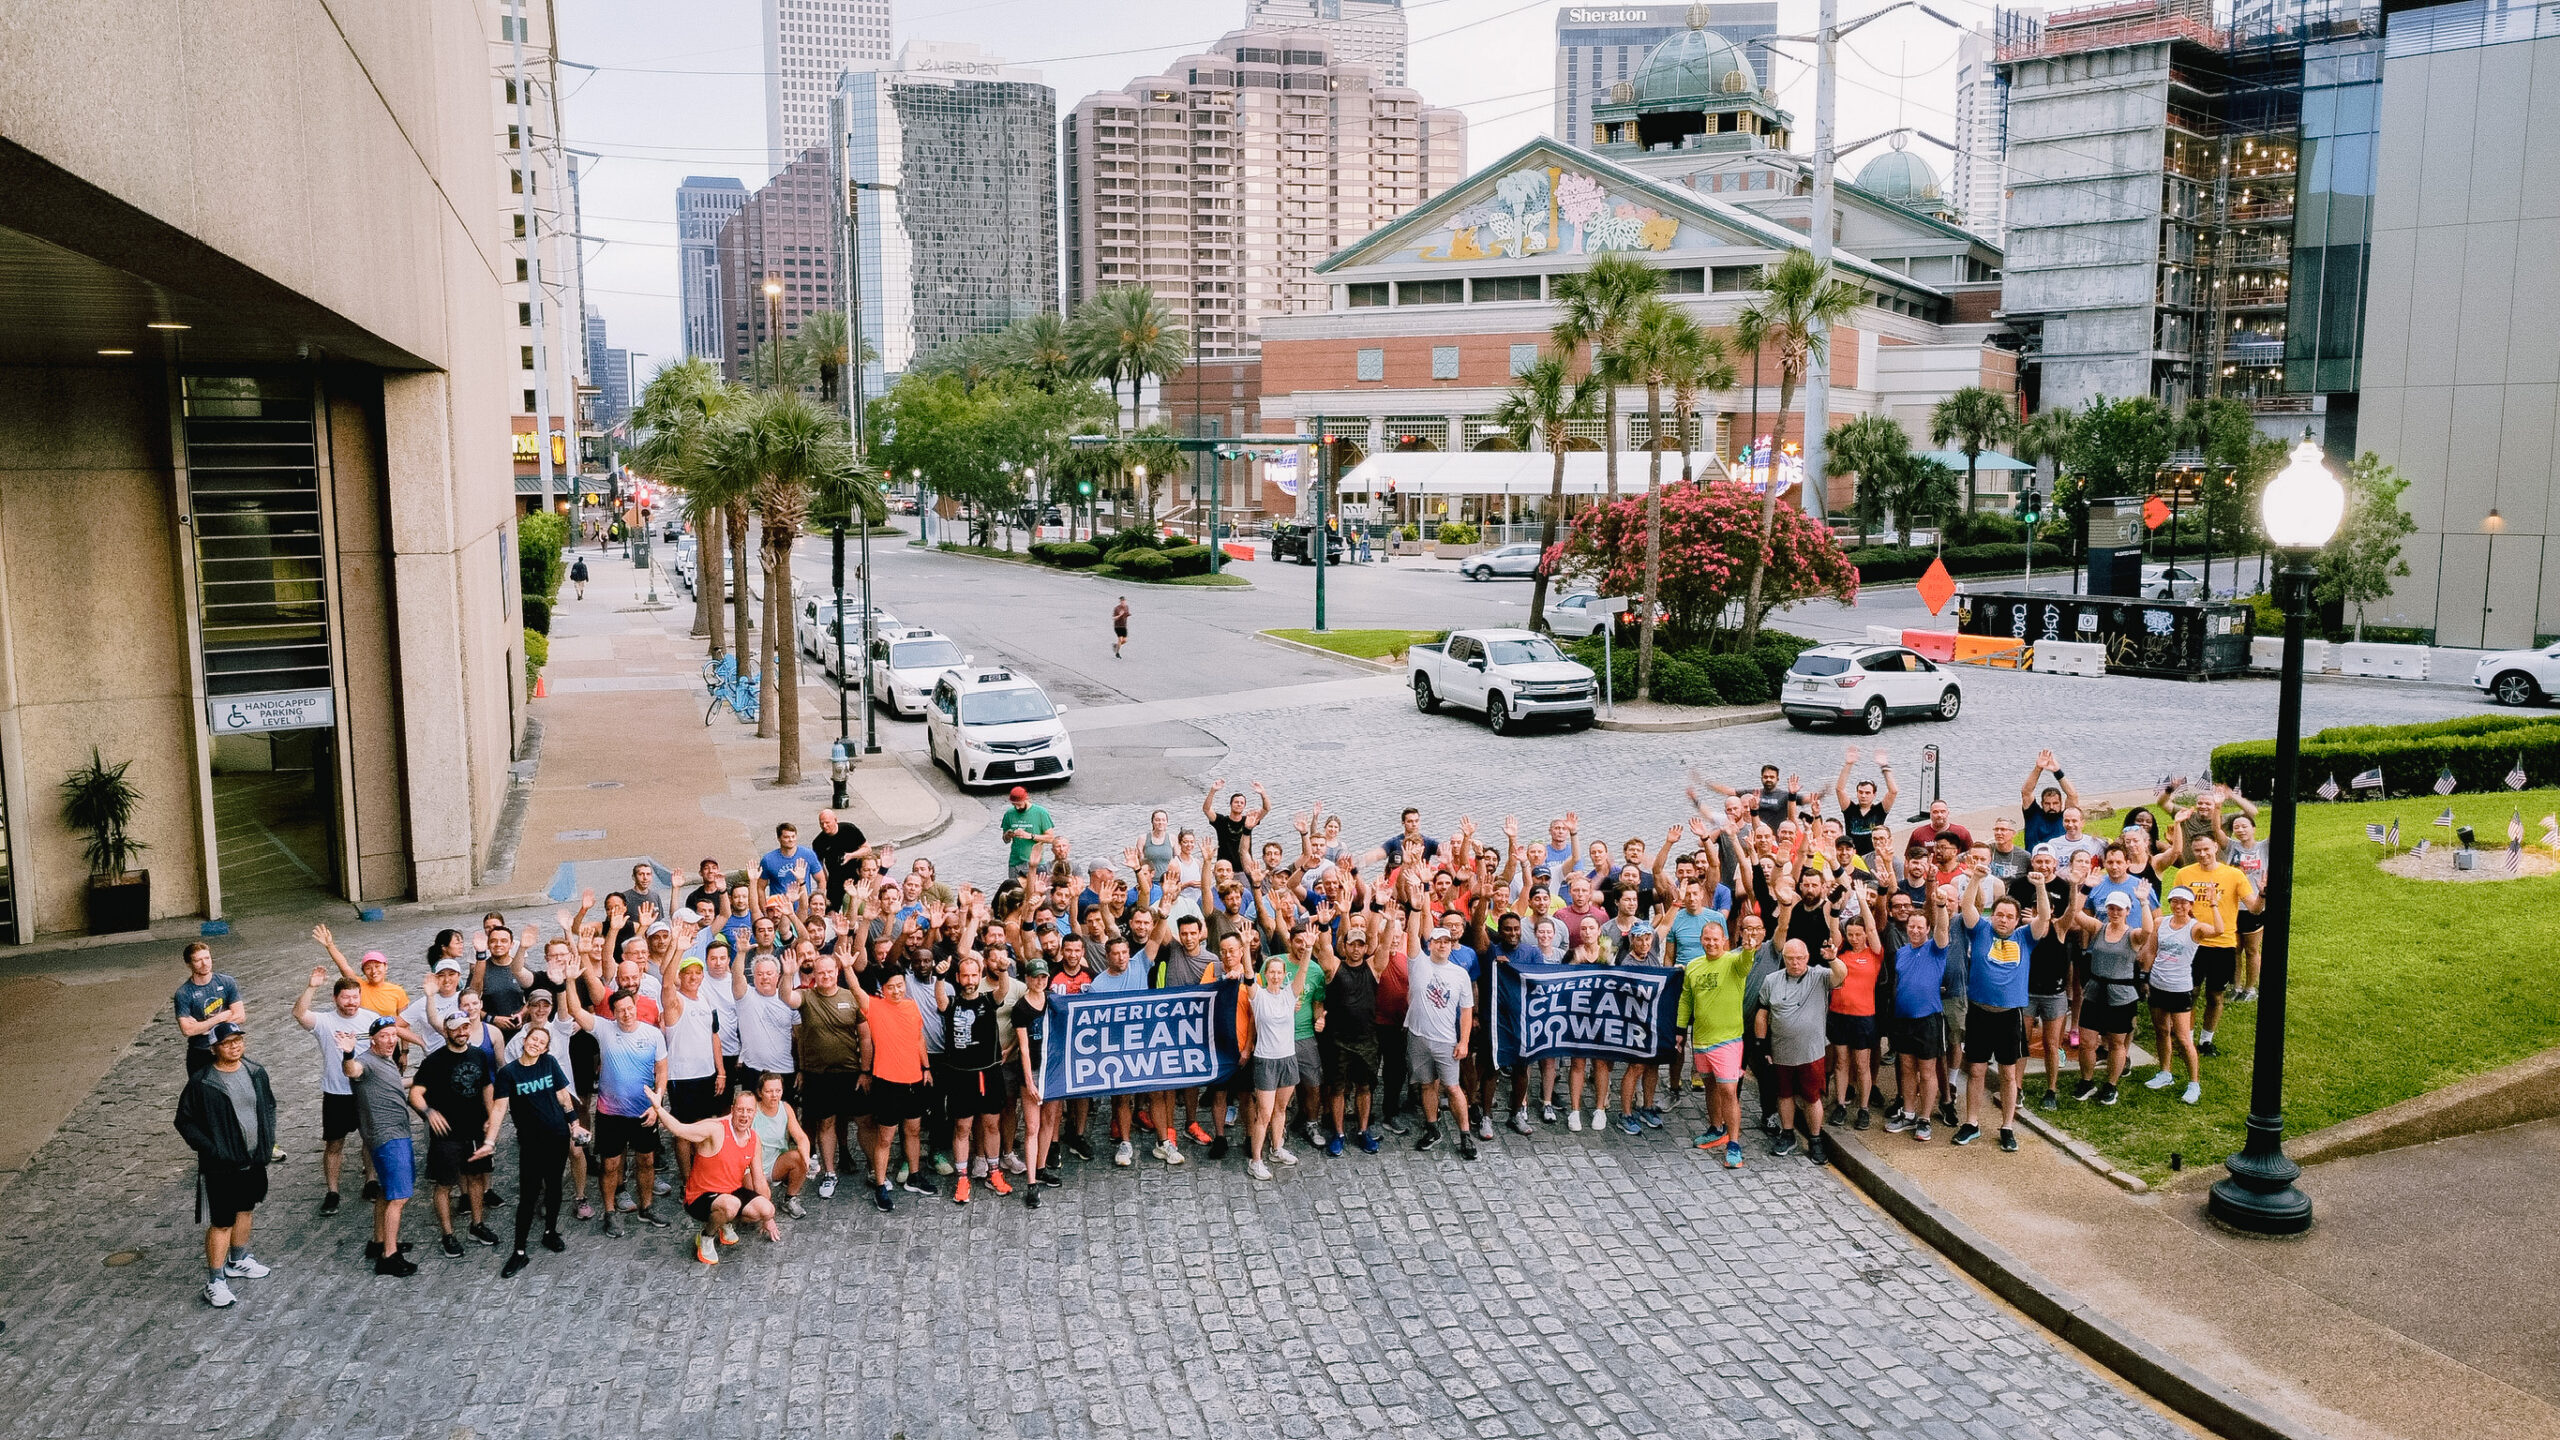 A drone shot of a crowd on a New Orleans street gathered for the 5k fun run at CLEANPOWER holding American Clean Power Flags